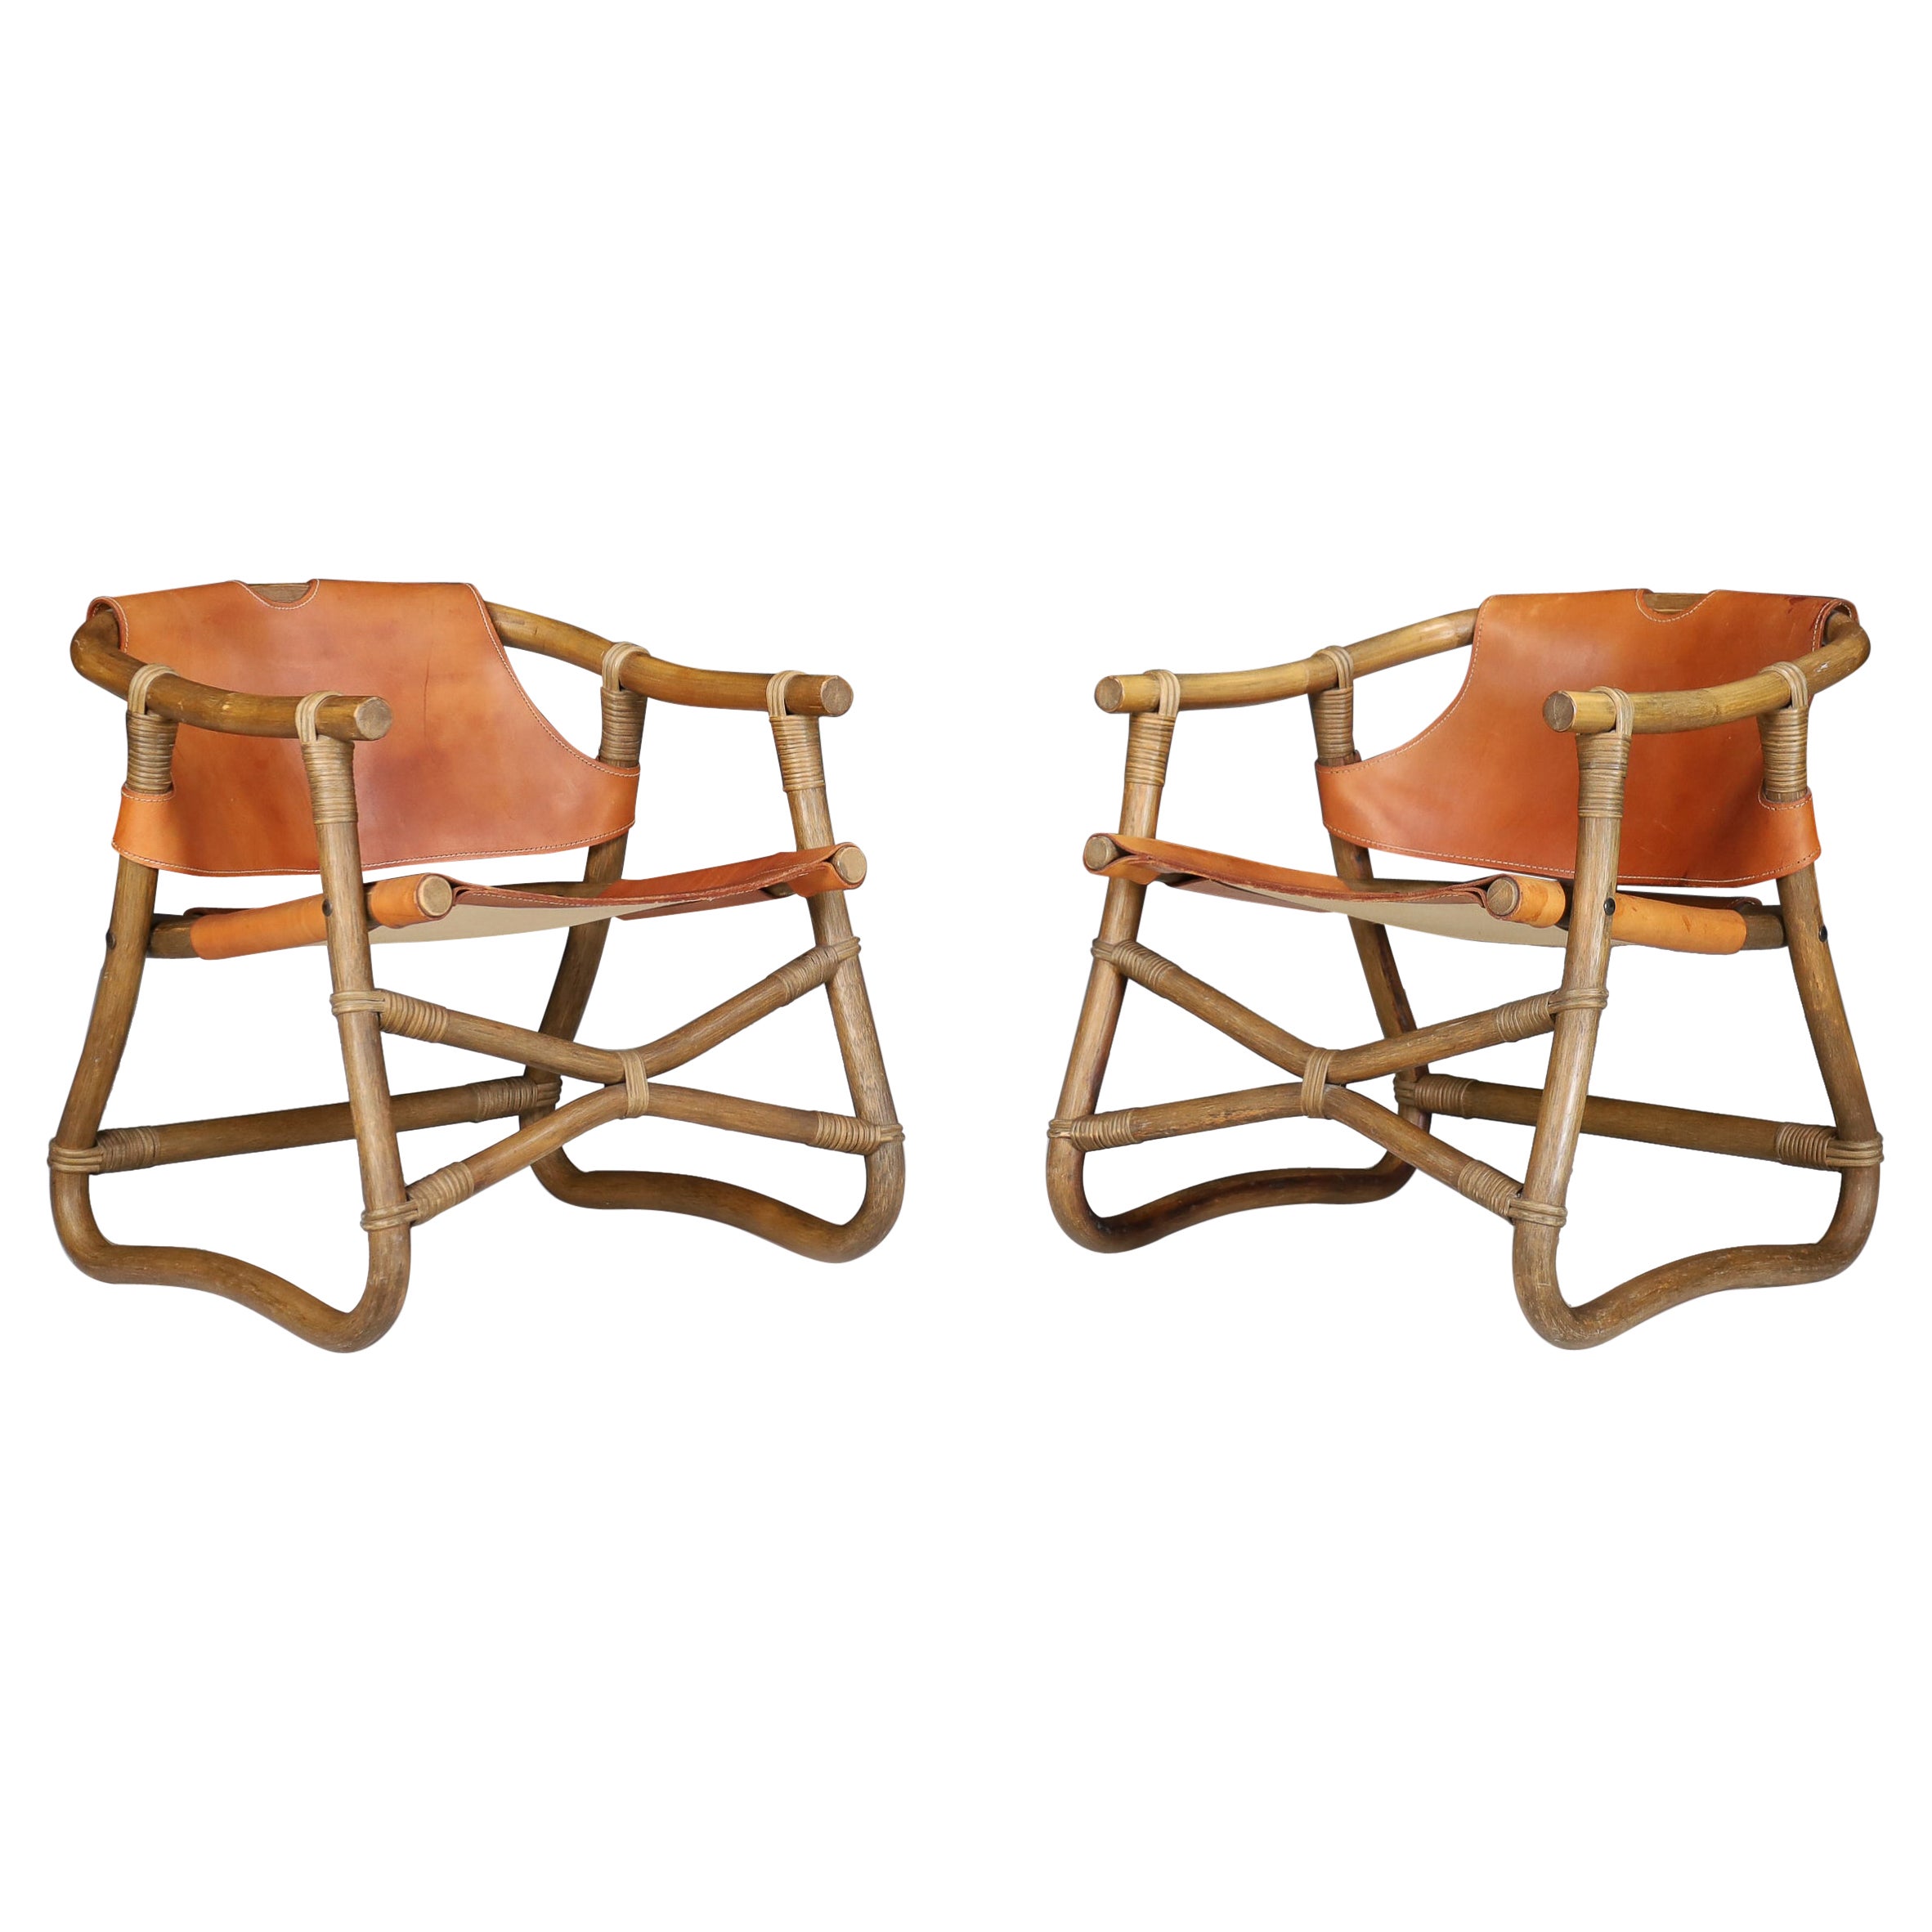 Cognac Leather Esprit Safari Lounge Chairs by IKEA, Sweden, 1970s For Sale